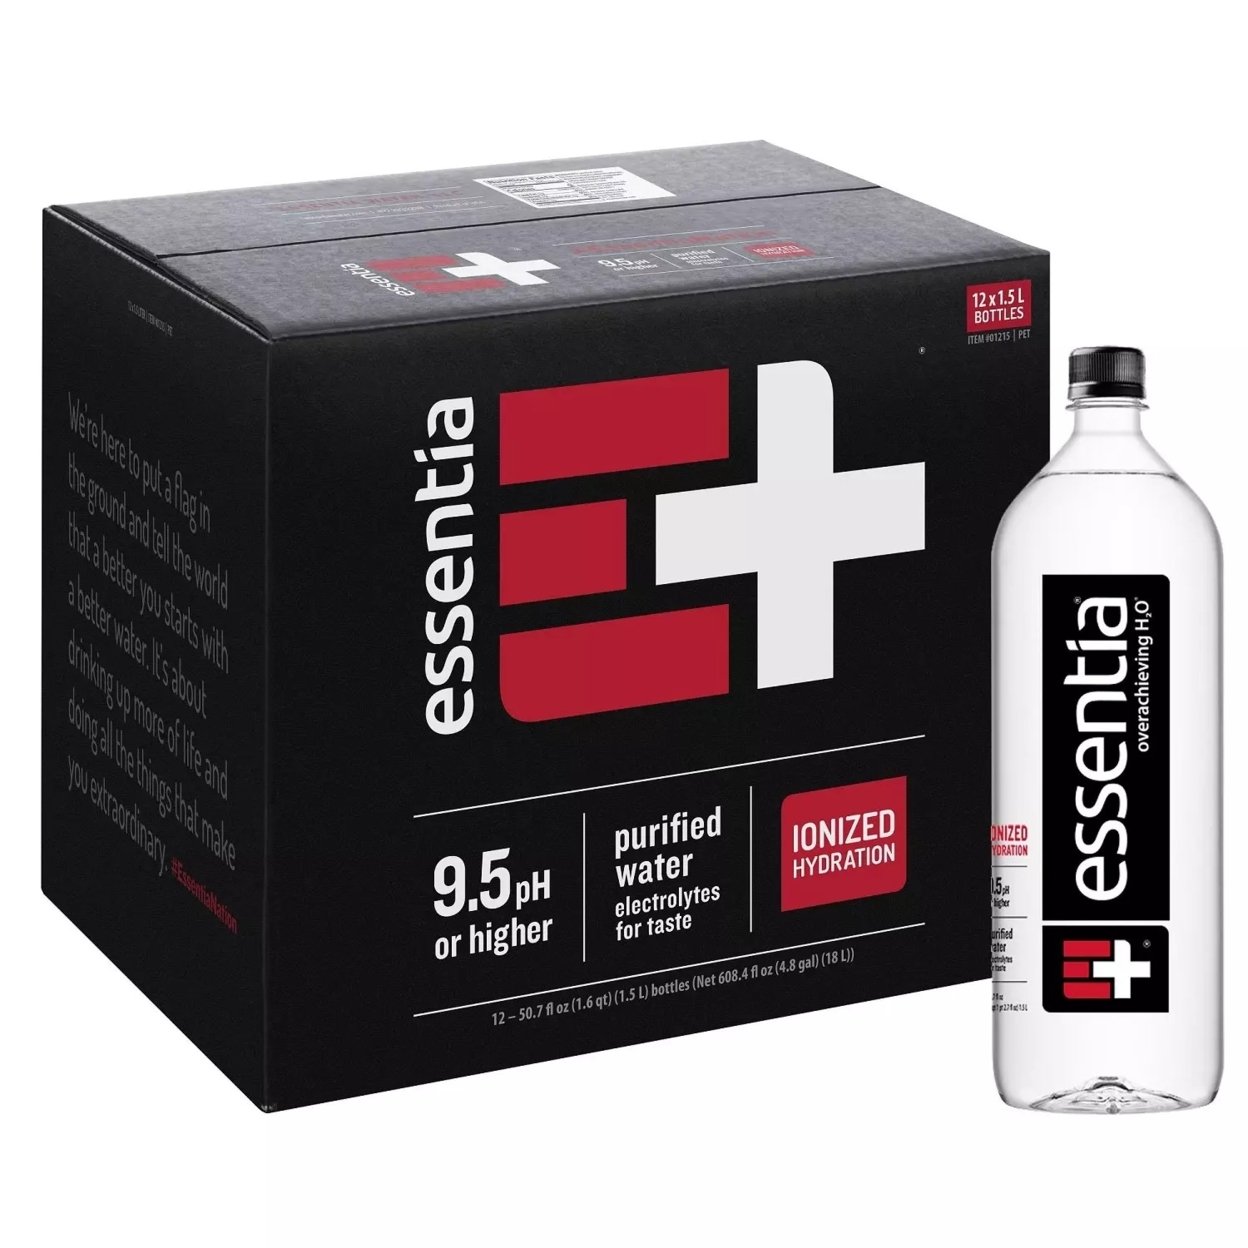 Essentia Ionized Water, 1.5L Bottles (Pack Of 12)